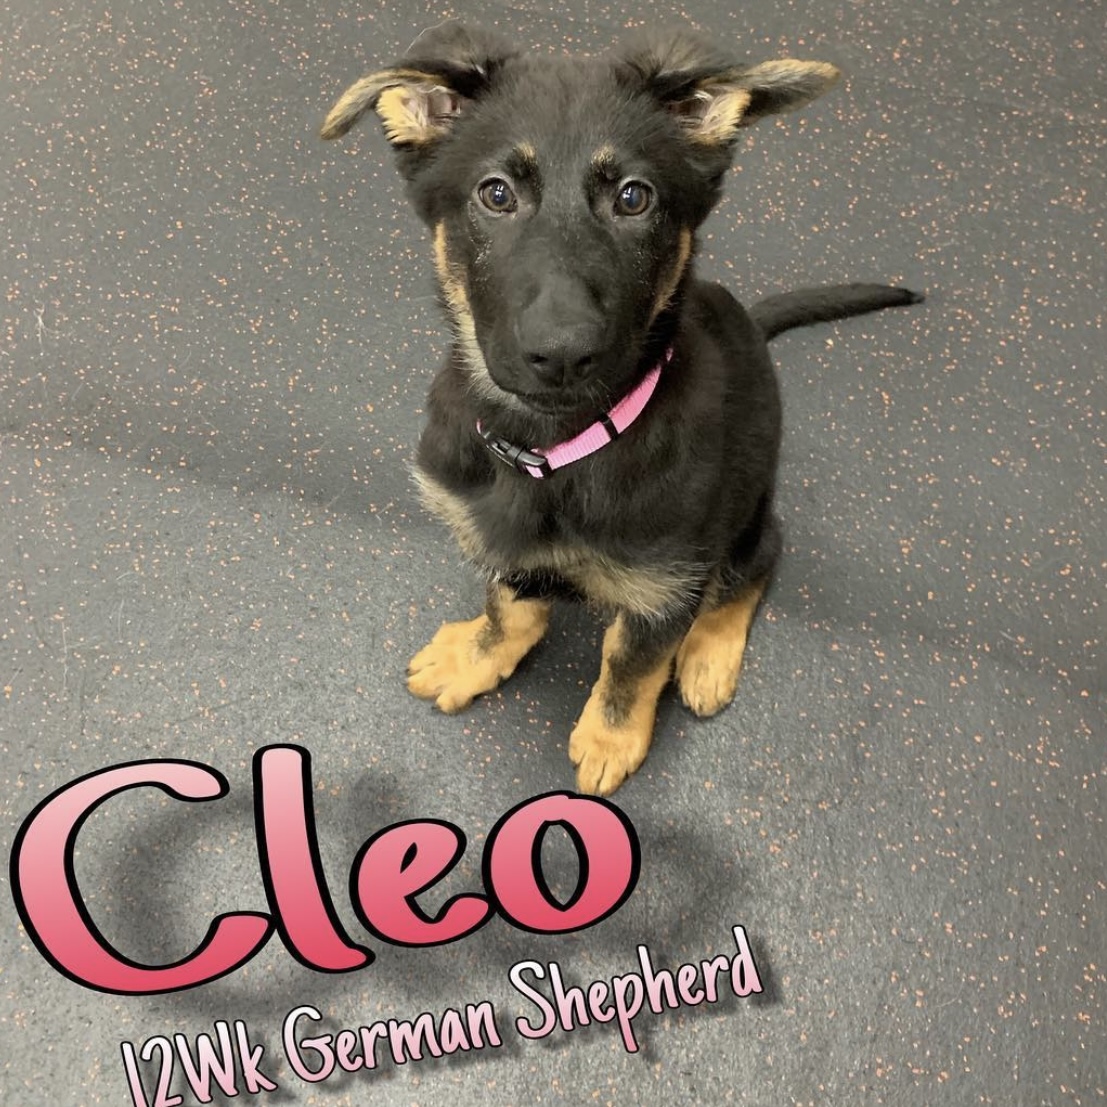 Puppy named Cleo during her puppy training class in Maryland